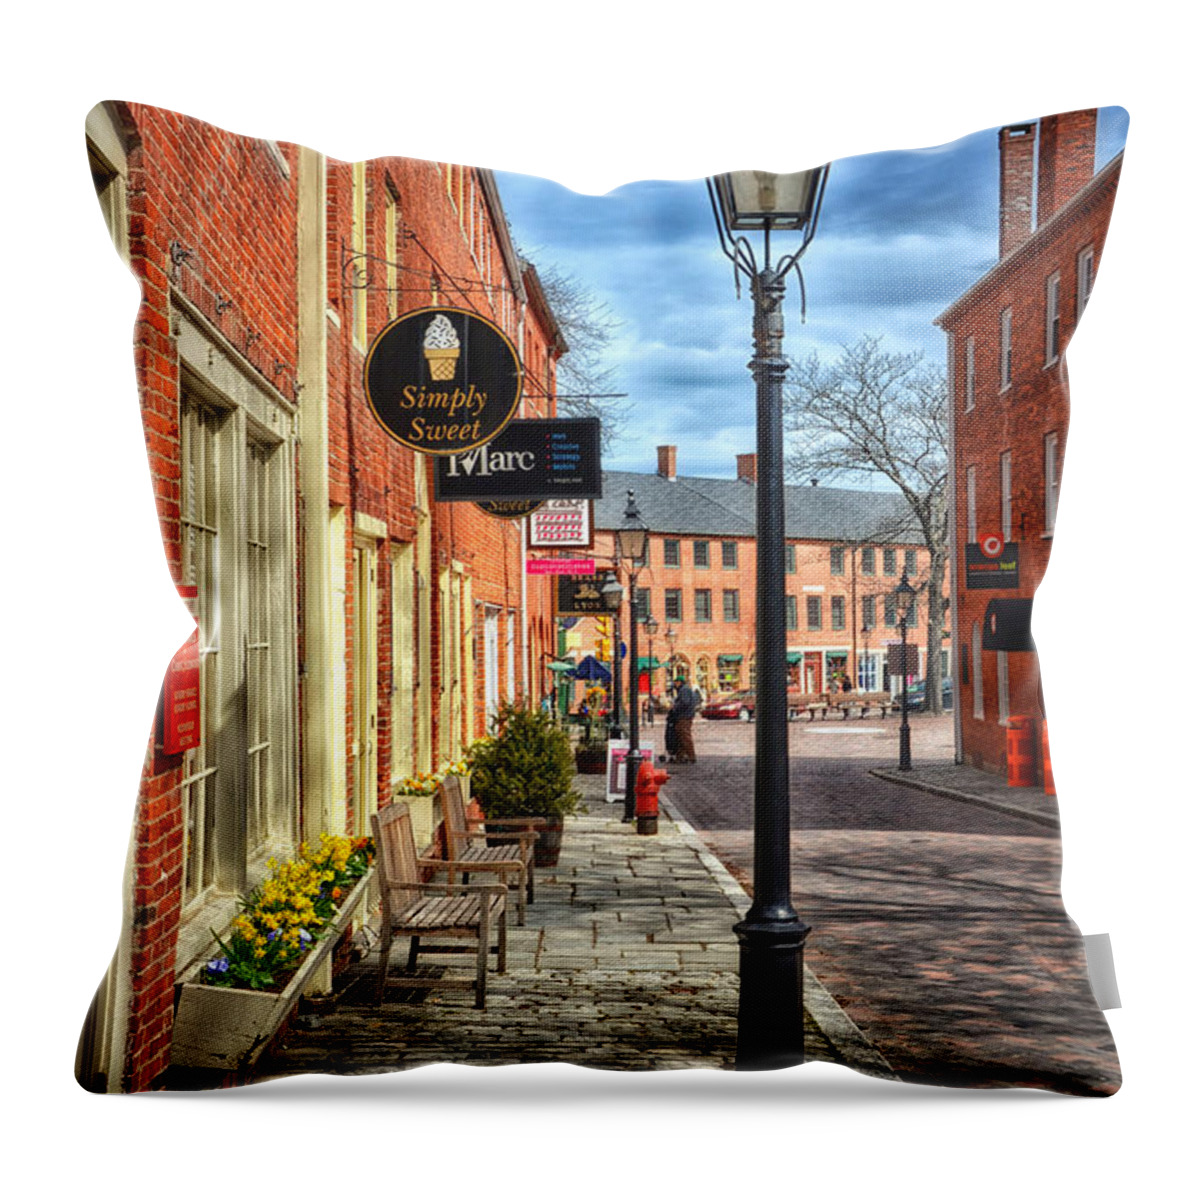 Brick Throw Pillow featuring the photograph Simply Sweet by Tricia Marchlik